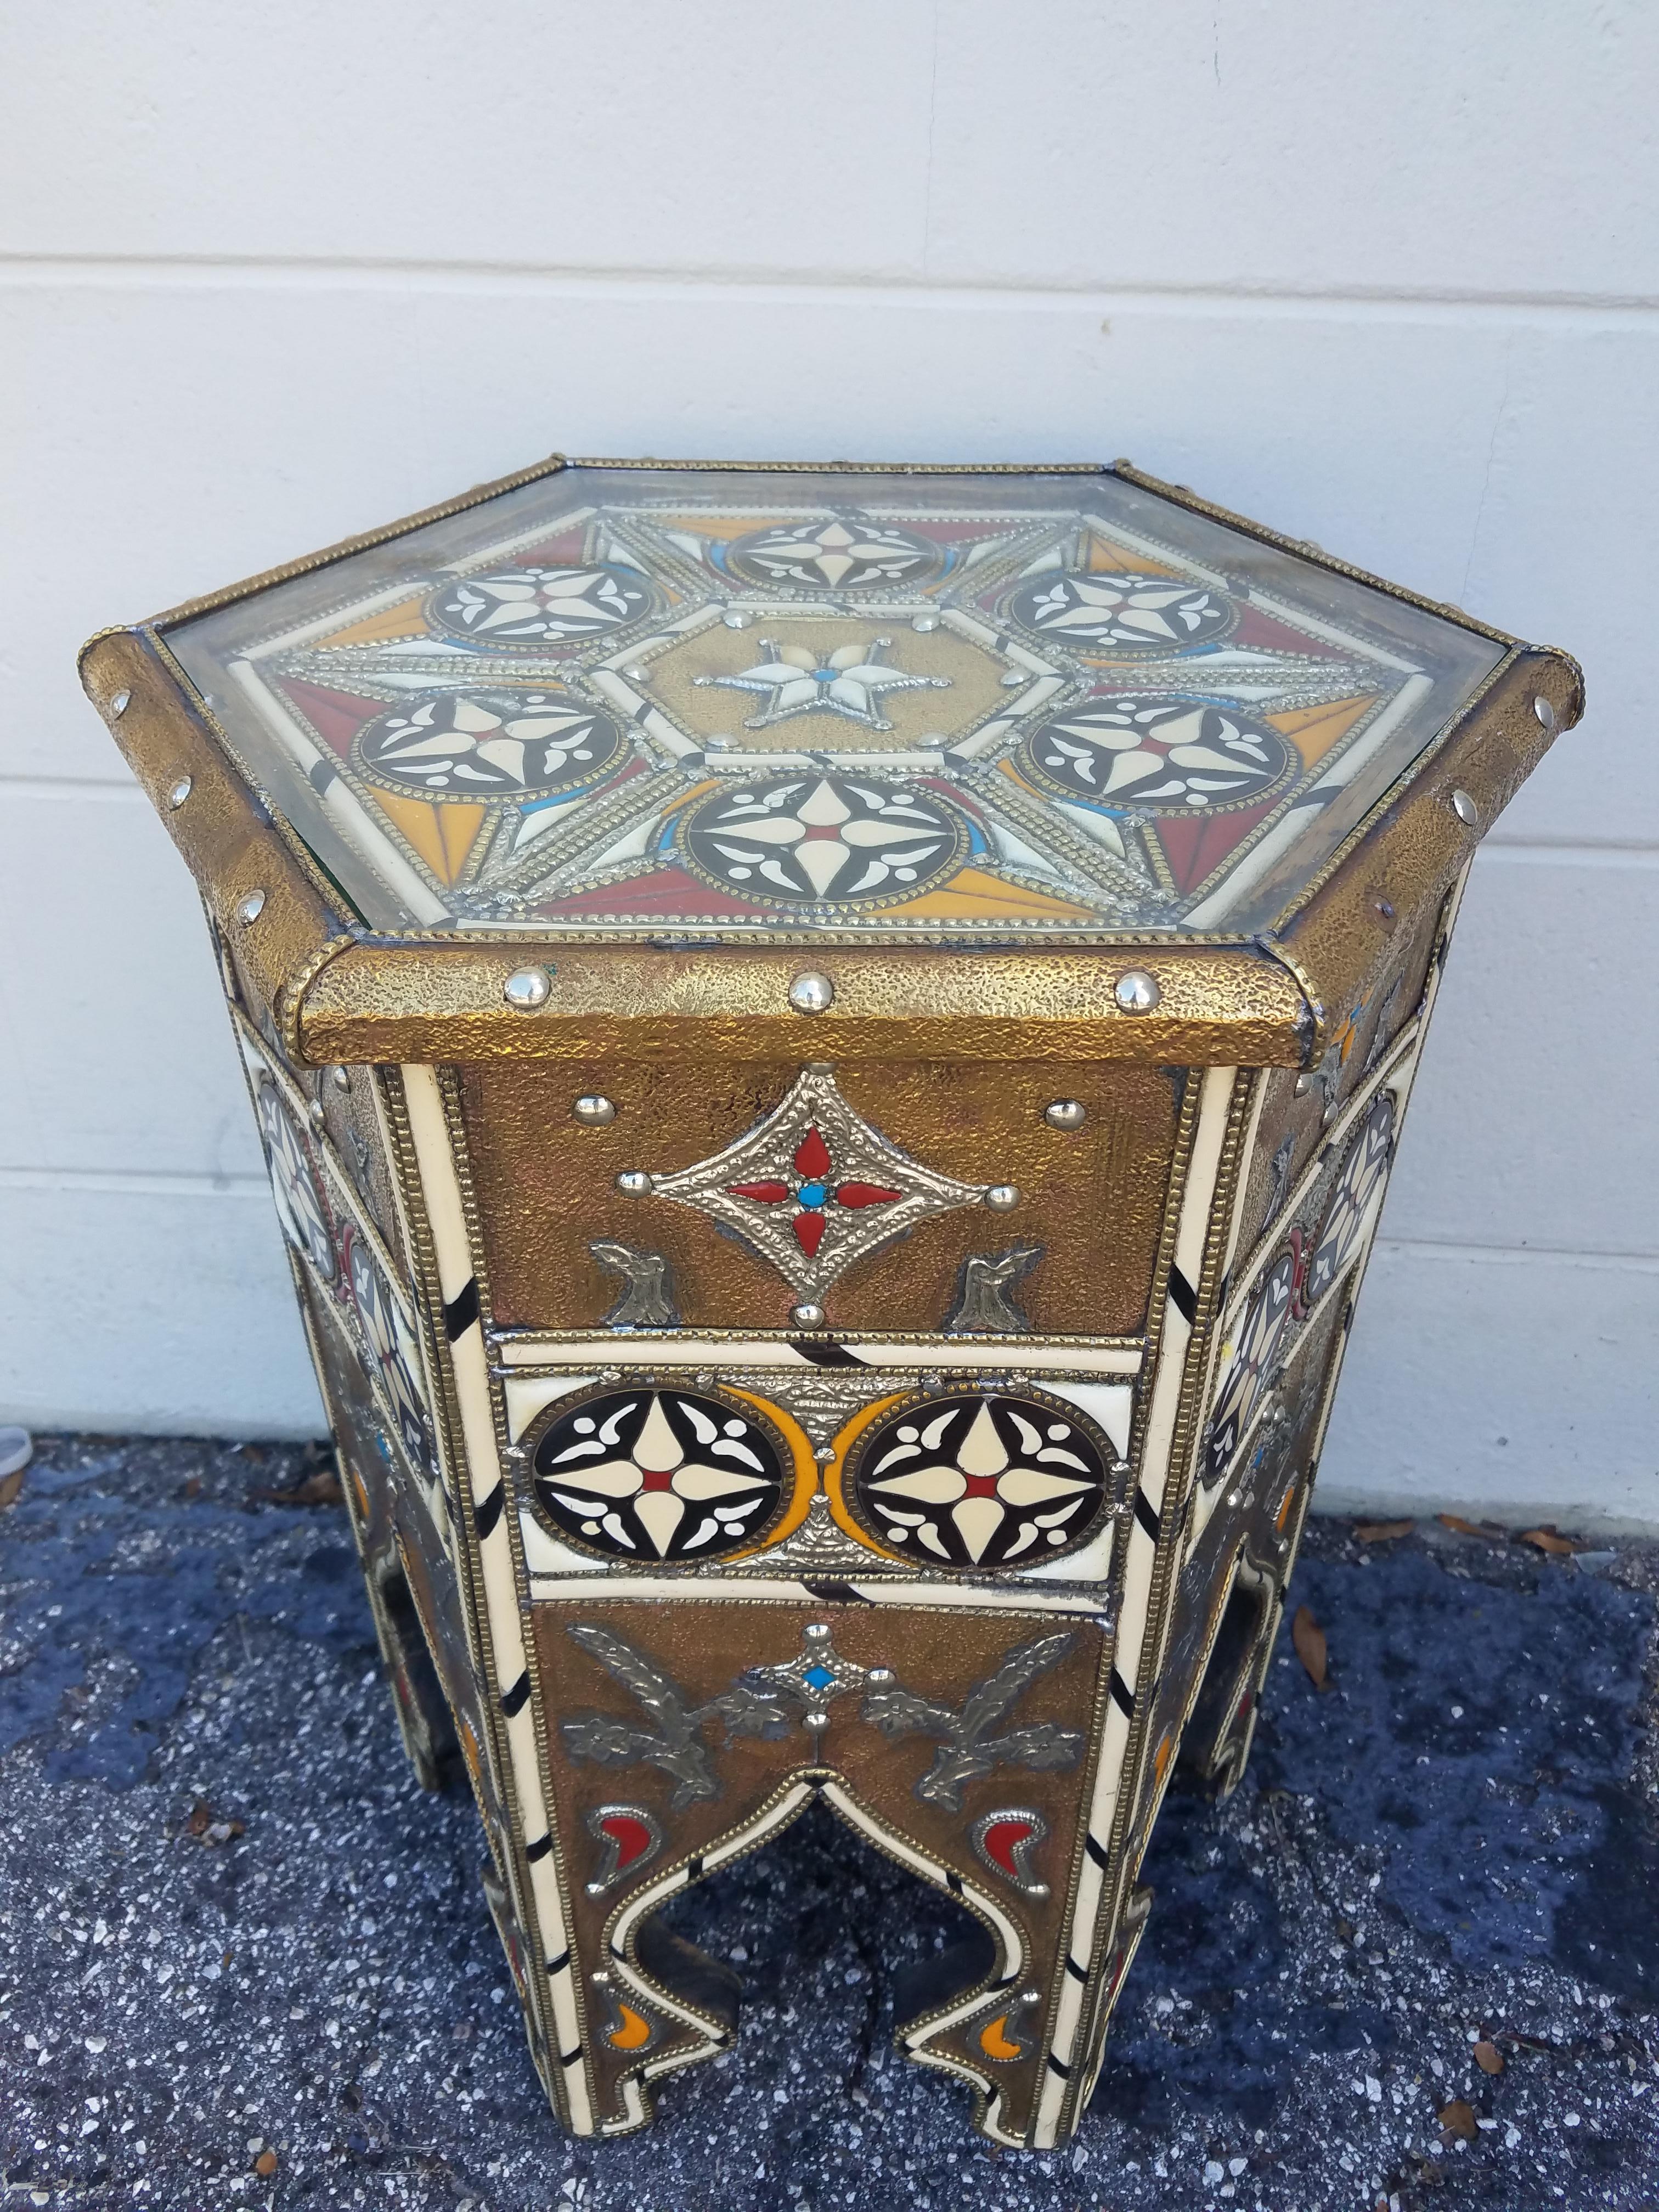 A new arrival. This beautiful camel bone, resin, and metal inlaid Moroccan side table measures approximately 21